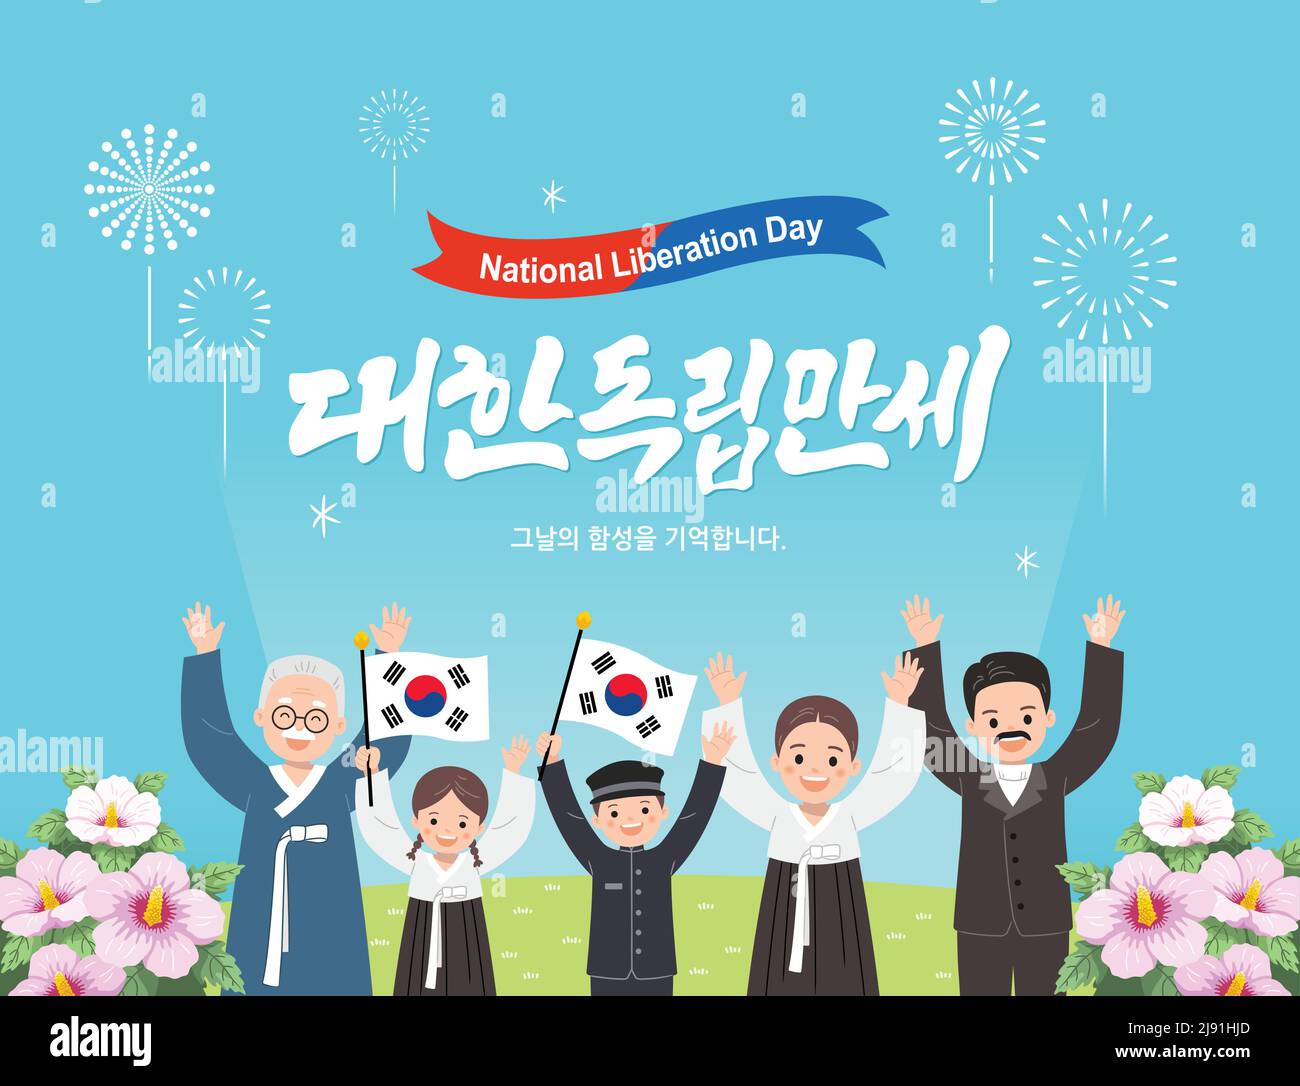 National Liberation day of Korea. People in hanbok celebrate by waving Taegeukgi. Hurray for the independence of Korea, Korean translation. Stock Vector